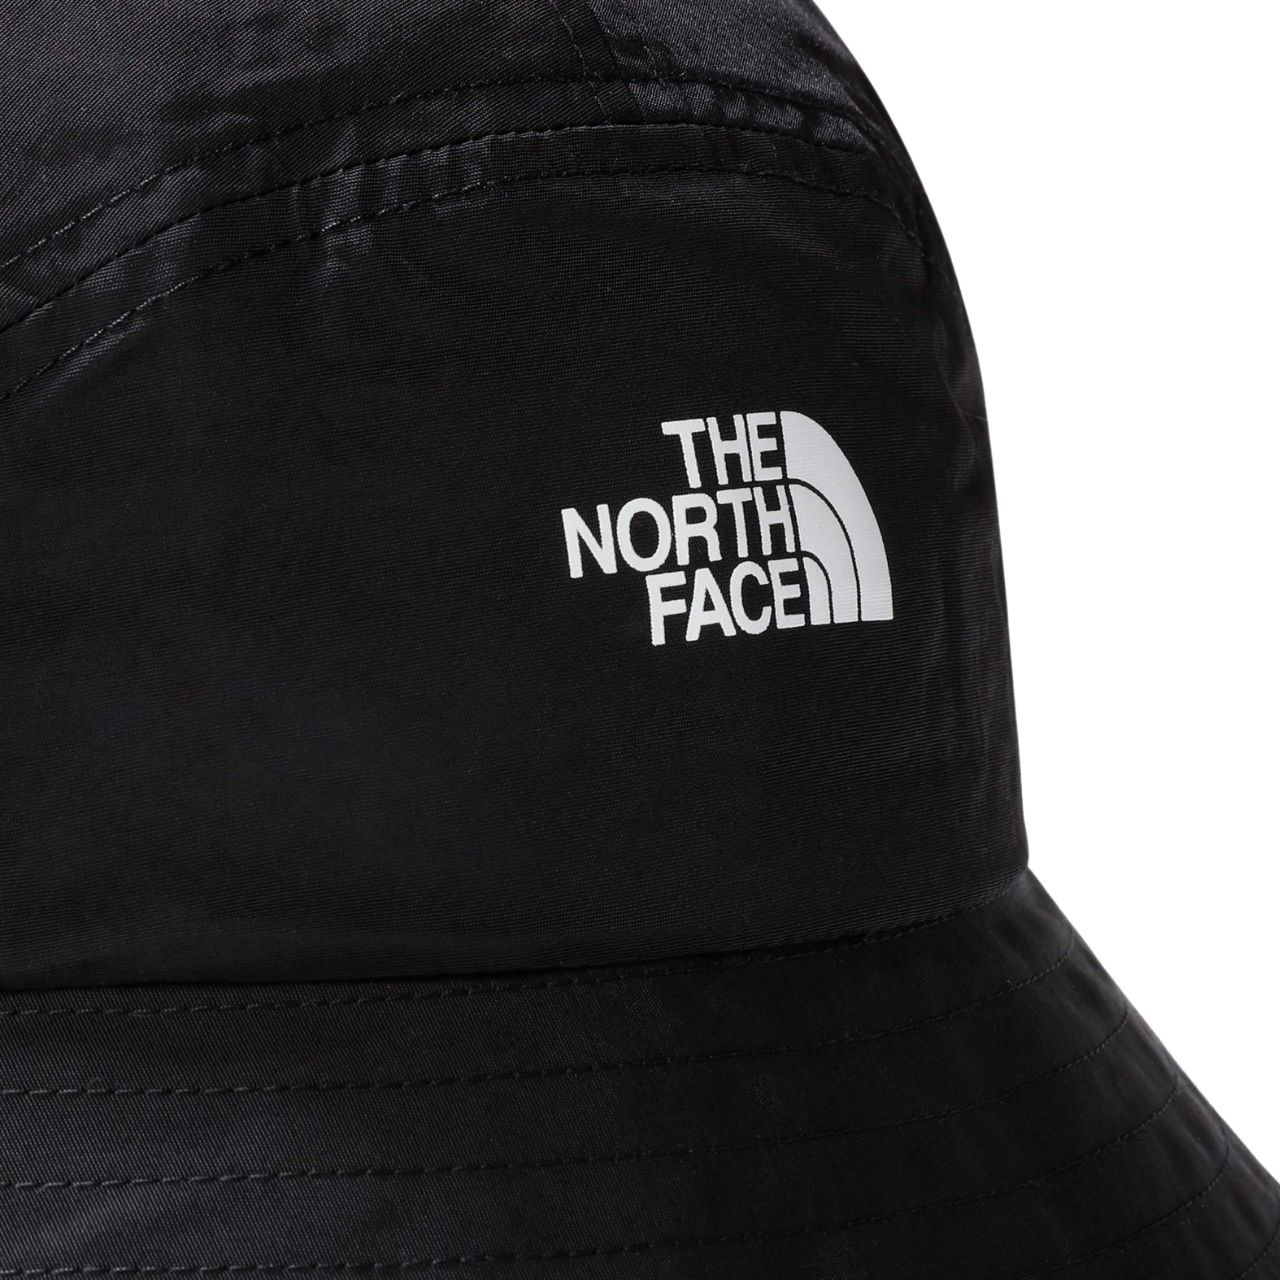 Панама The North Face CYPRESS BUCKET NF0A7WHAJK31